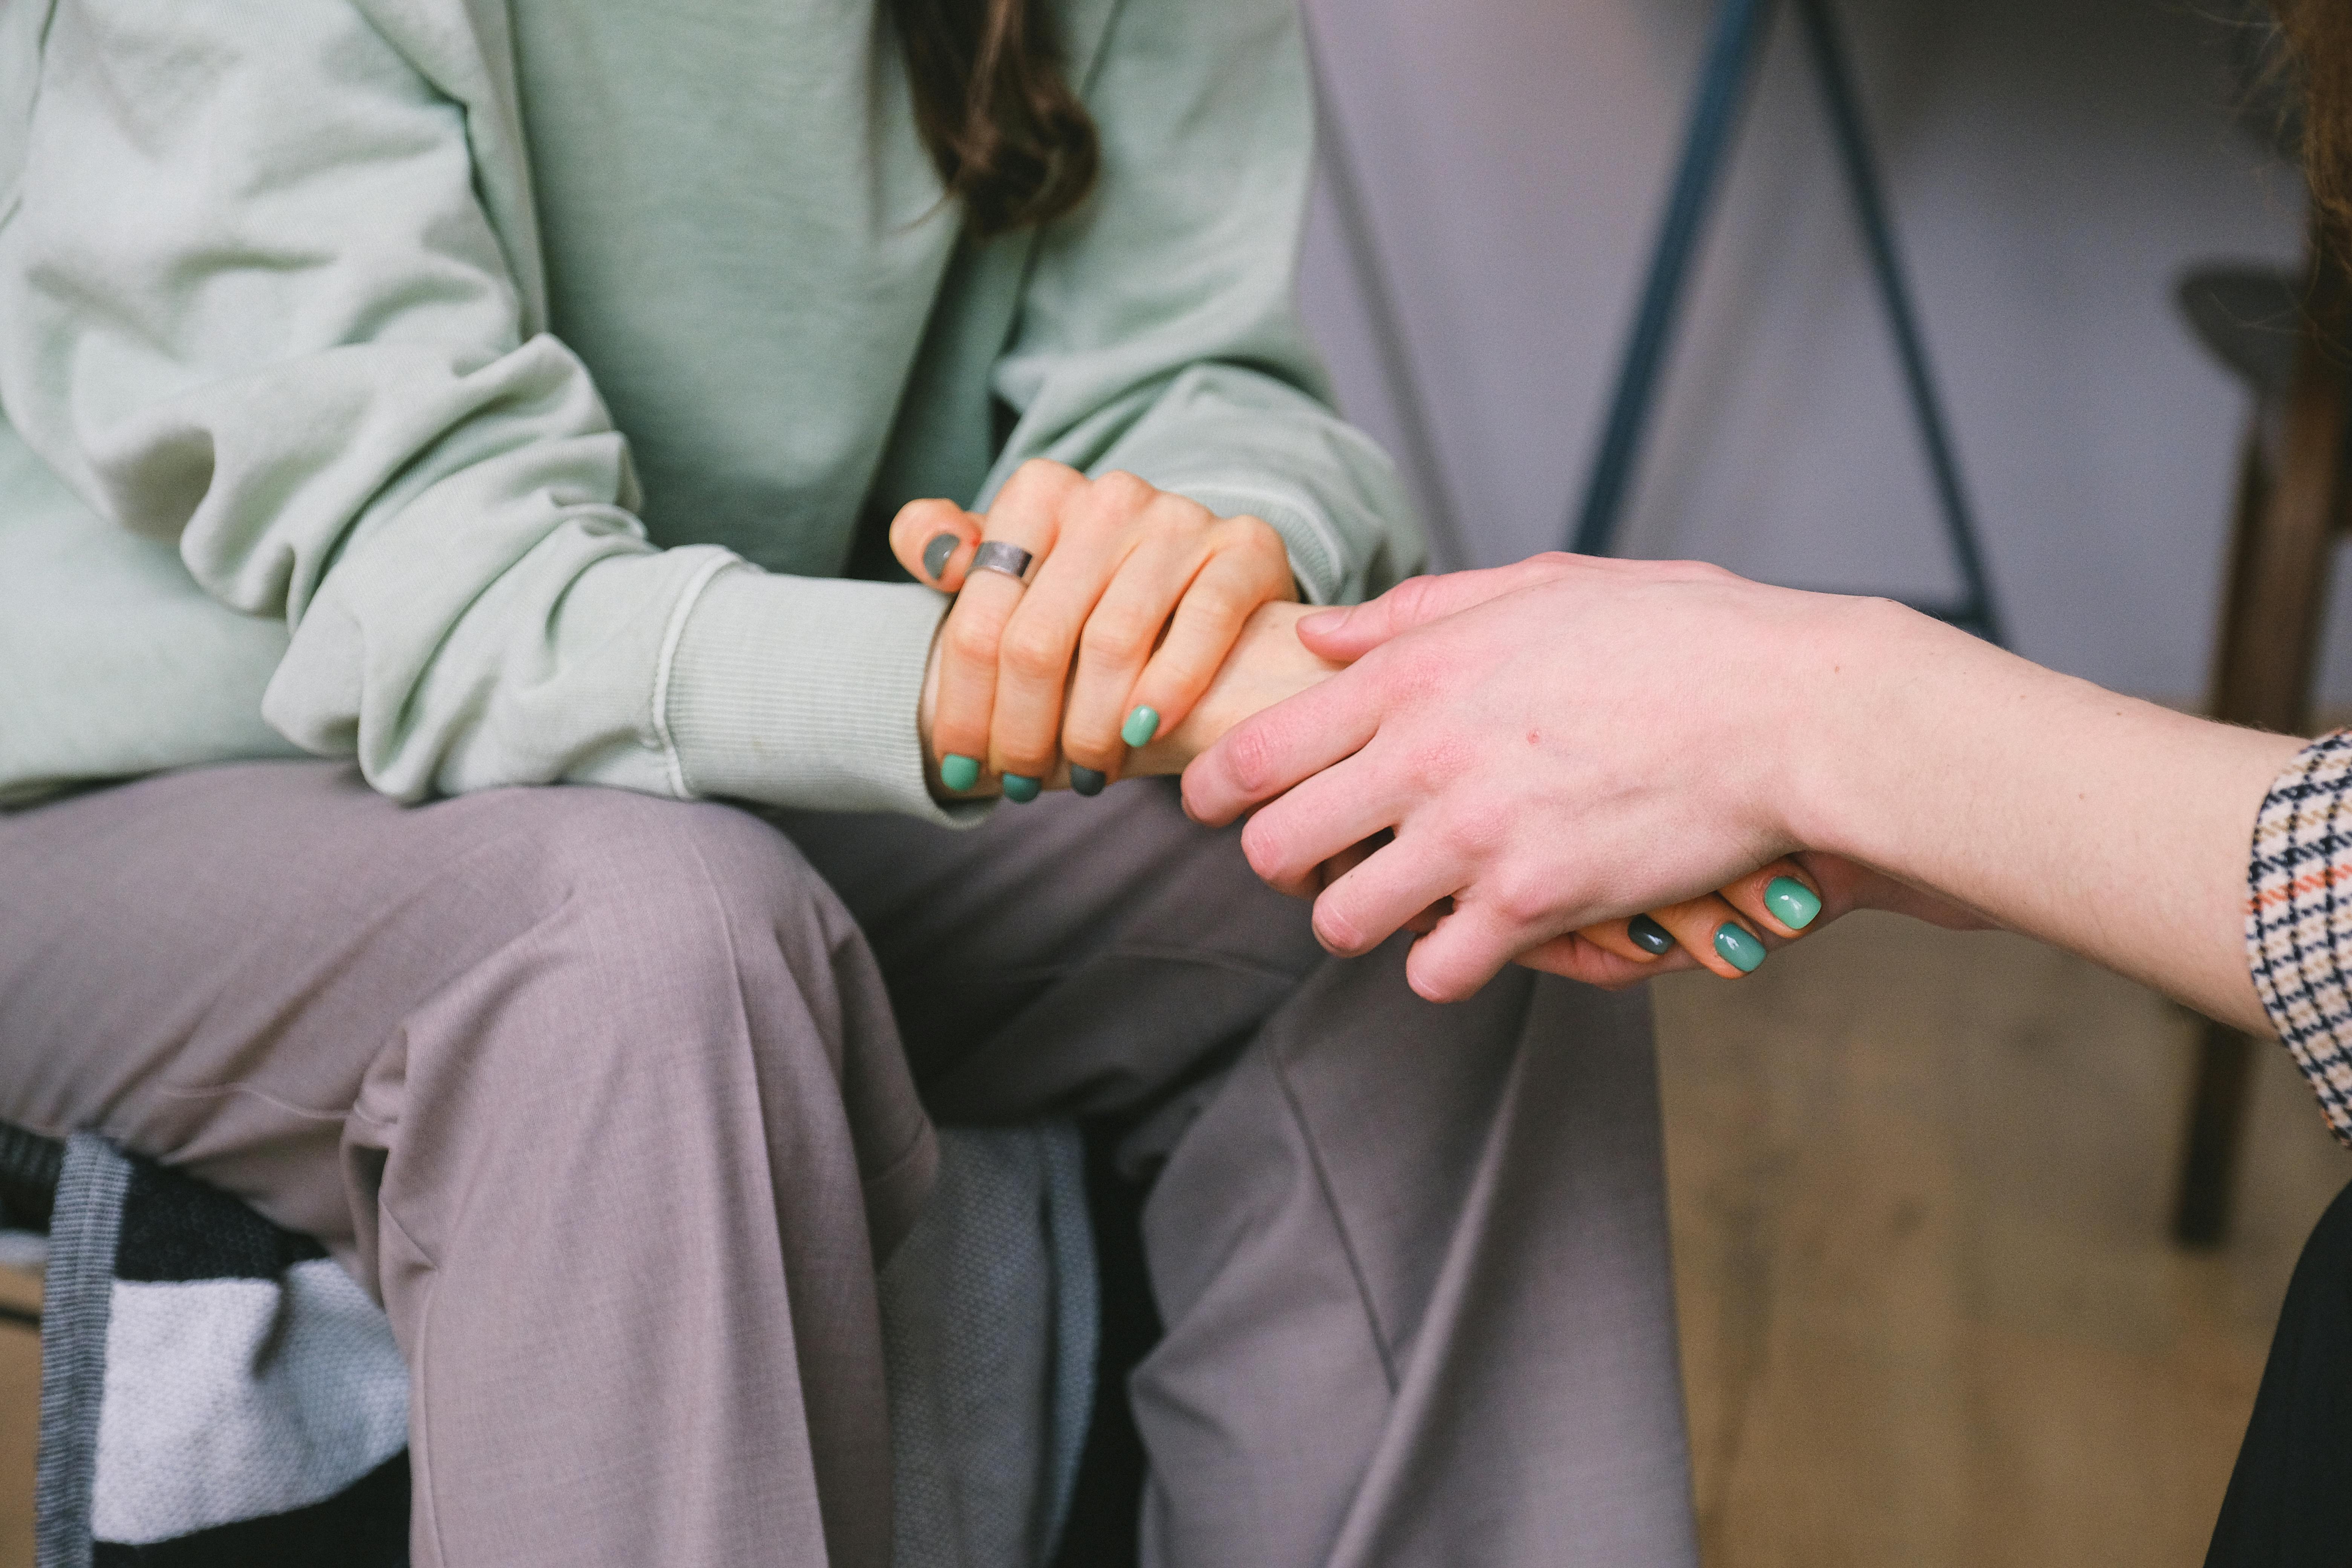 Two women holding hands | Source: Pexels